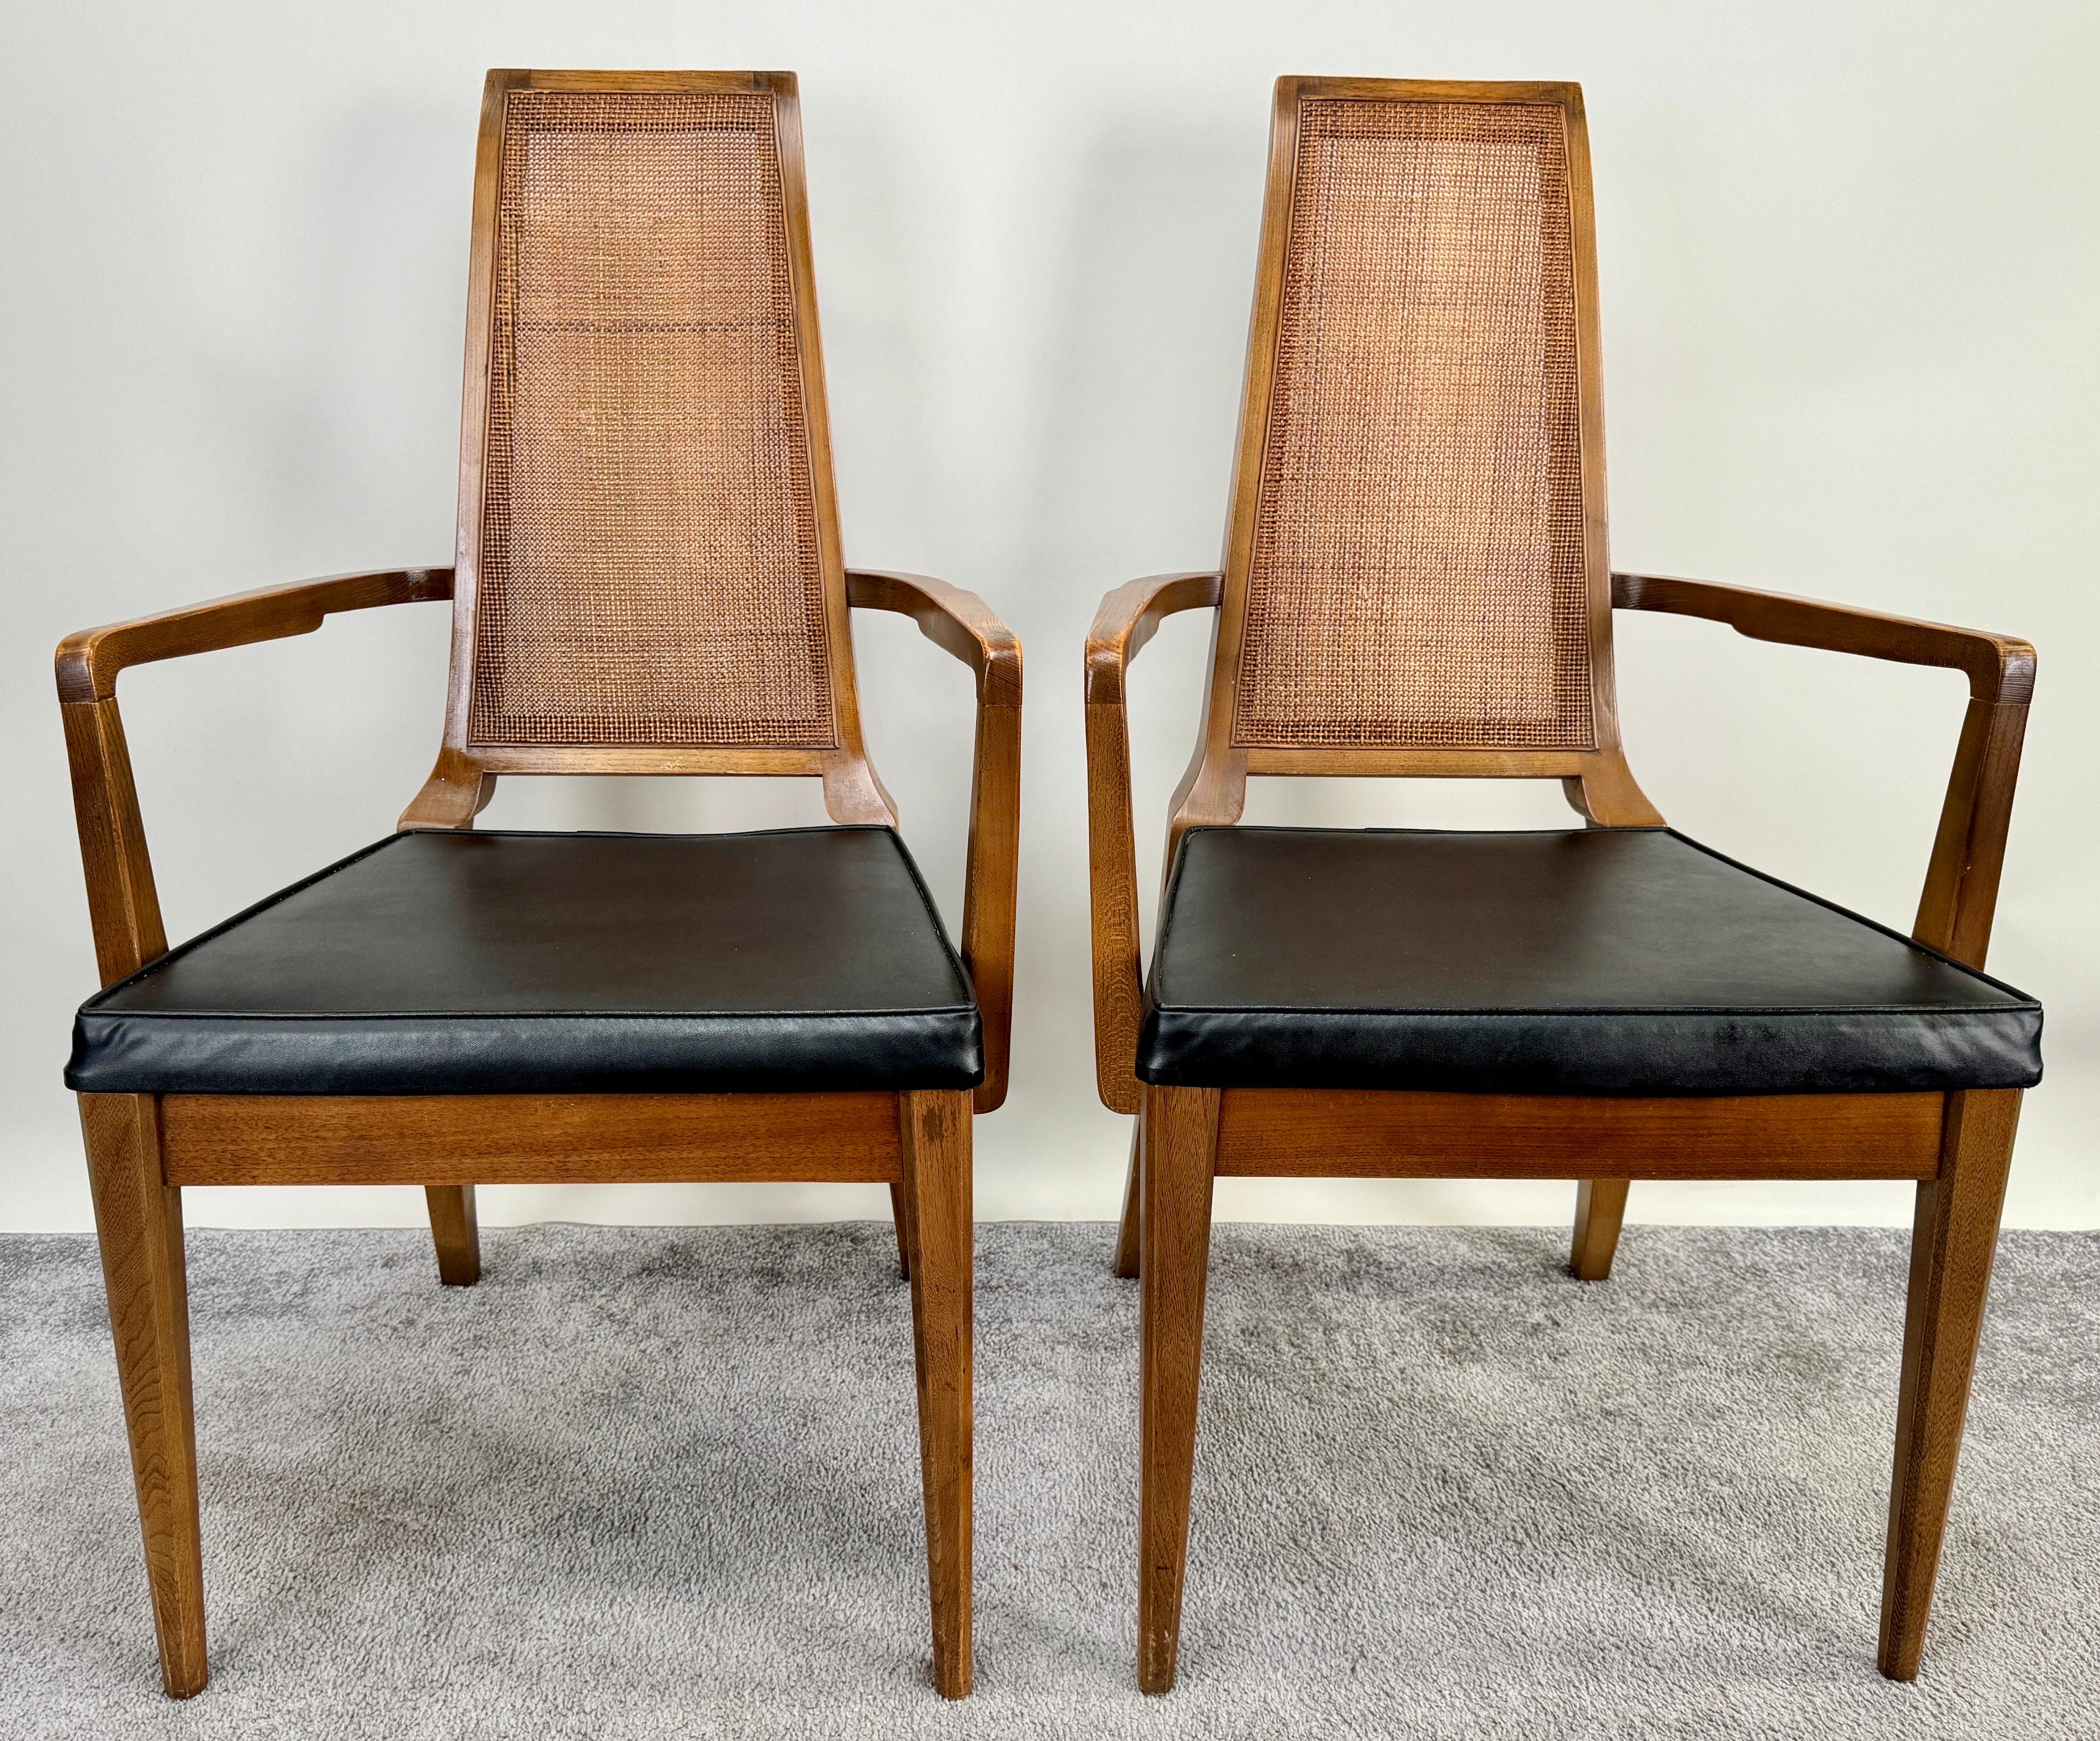 Mid Century Modern Walnut & Cane Dining Chair by American of Martinsville, 6 pcs For Sale 4